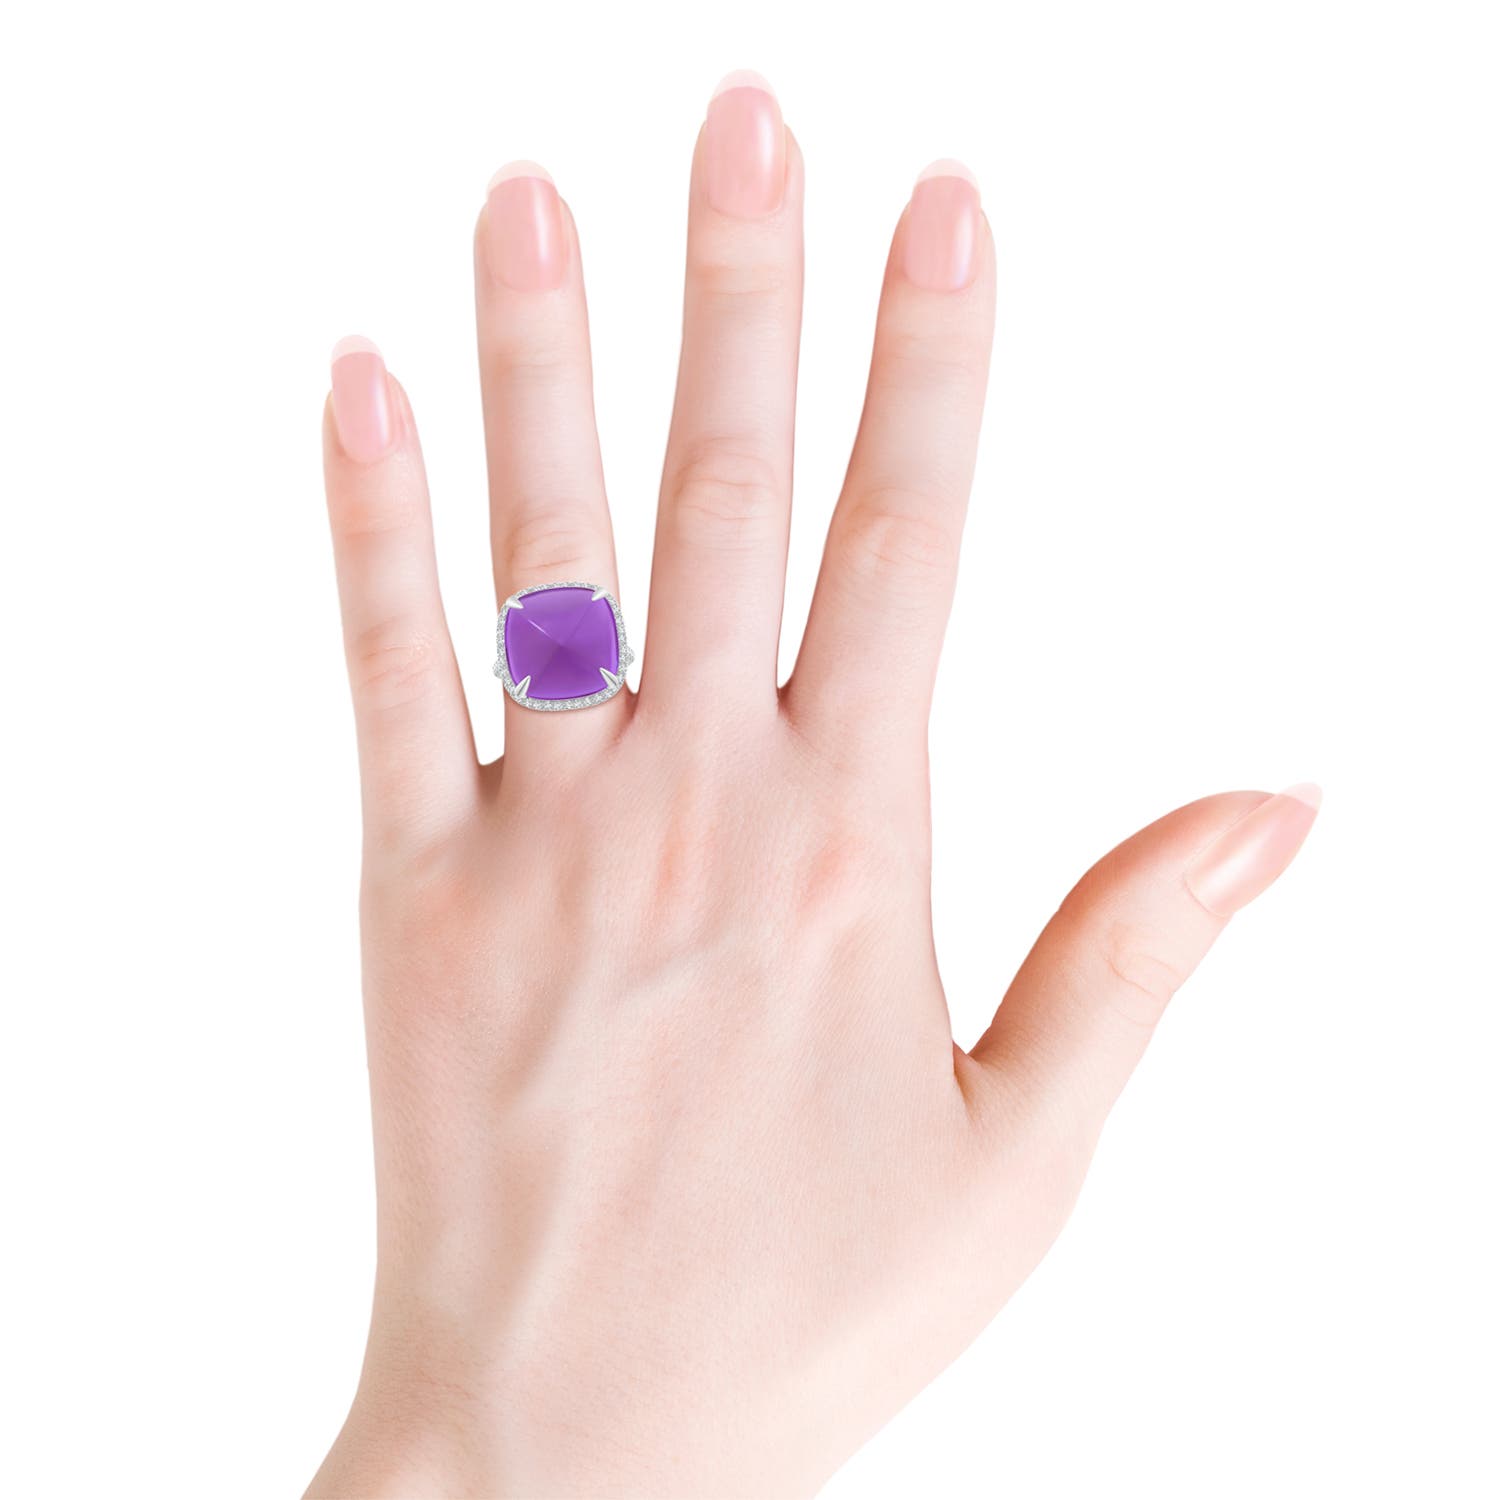 AAA - Amethyst / 16.02 CT / 14 KT White Gold